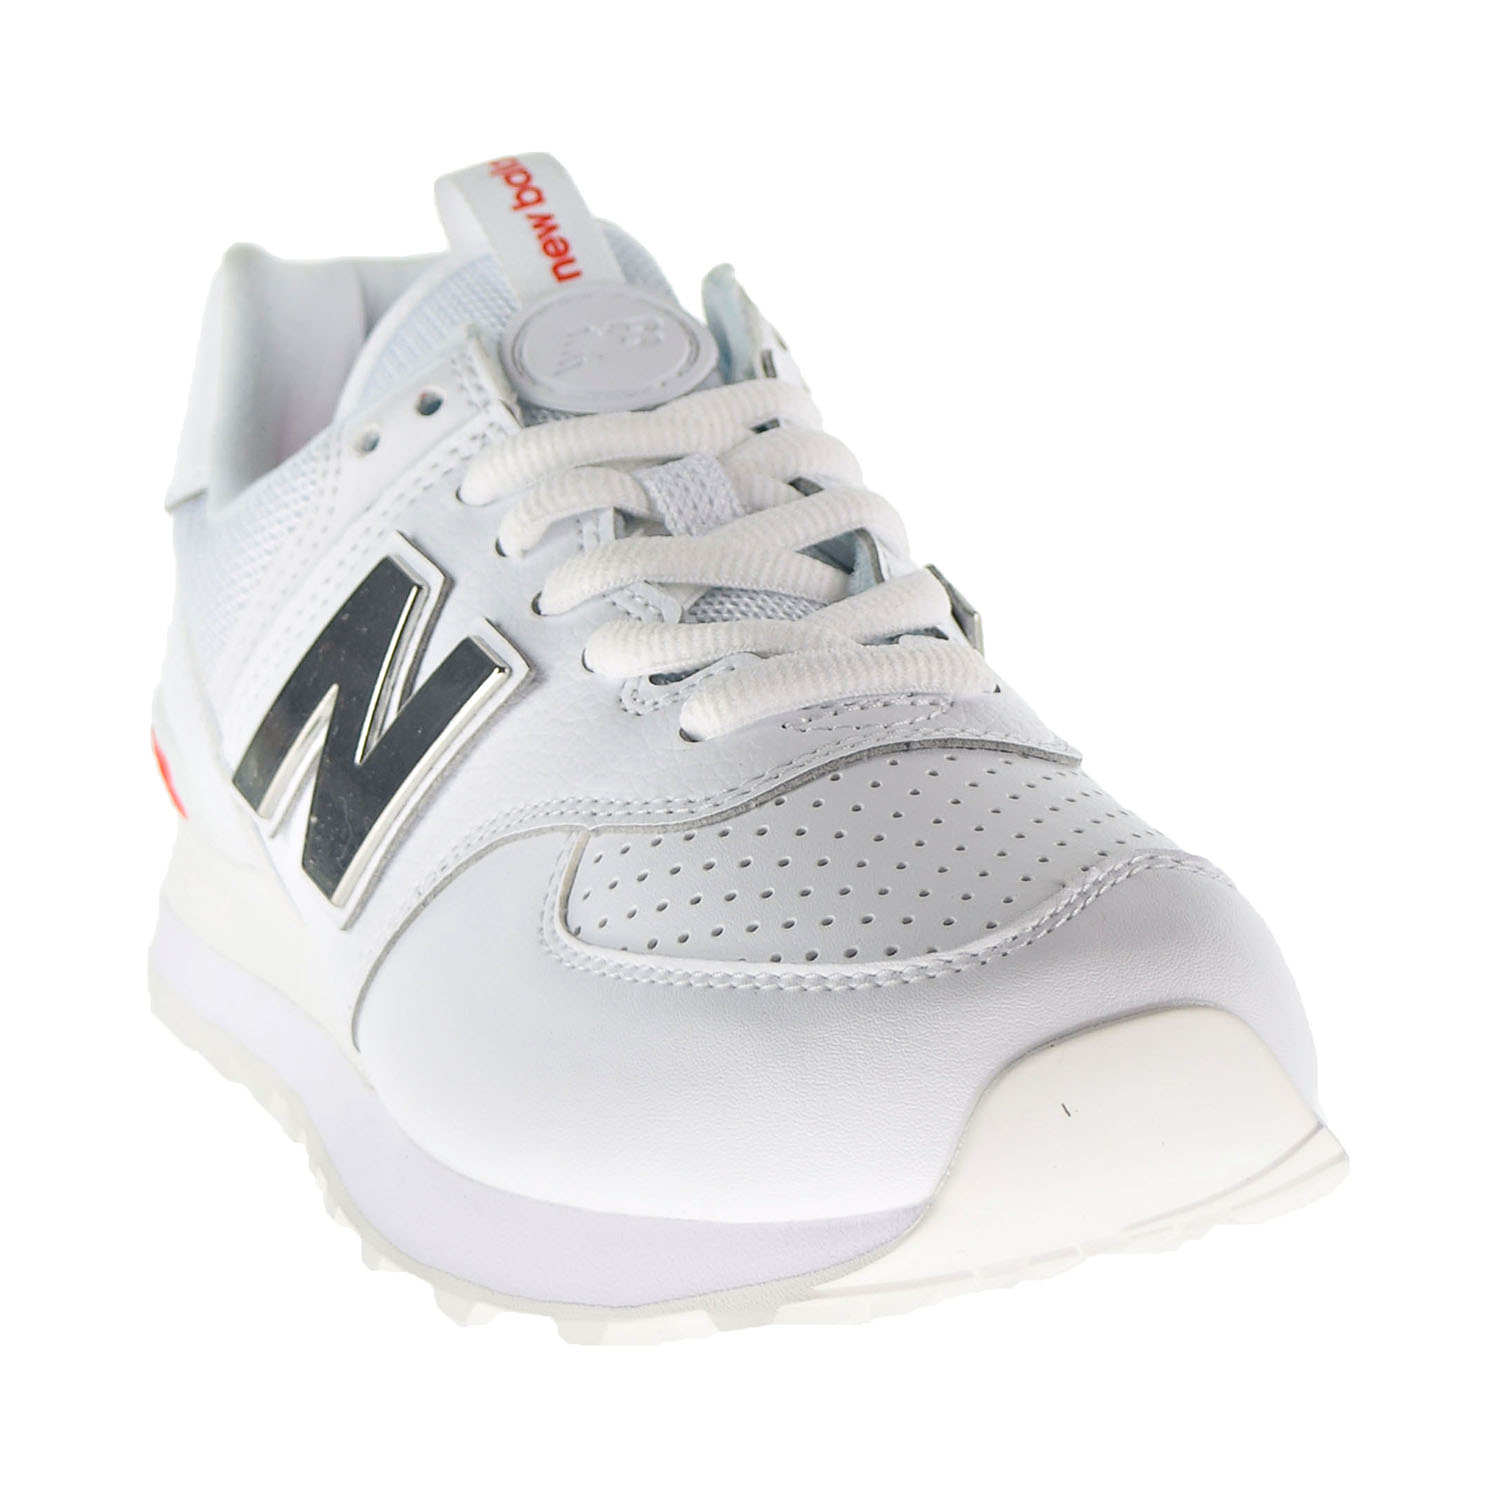 Ministry Accounting holy New Balance Classics 574 Metallic Men's Shoes White/Neo Flame ml574-sox